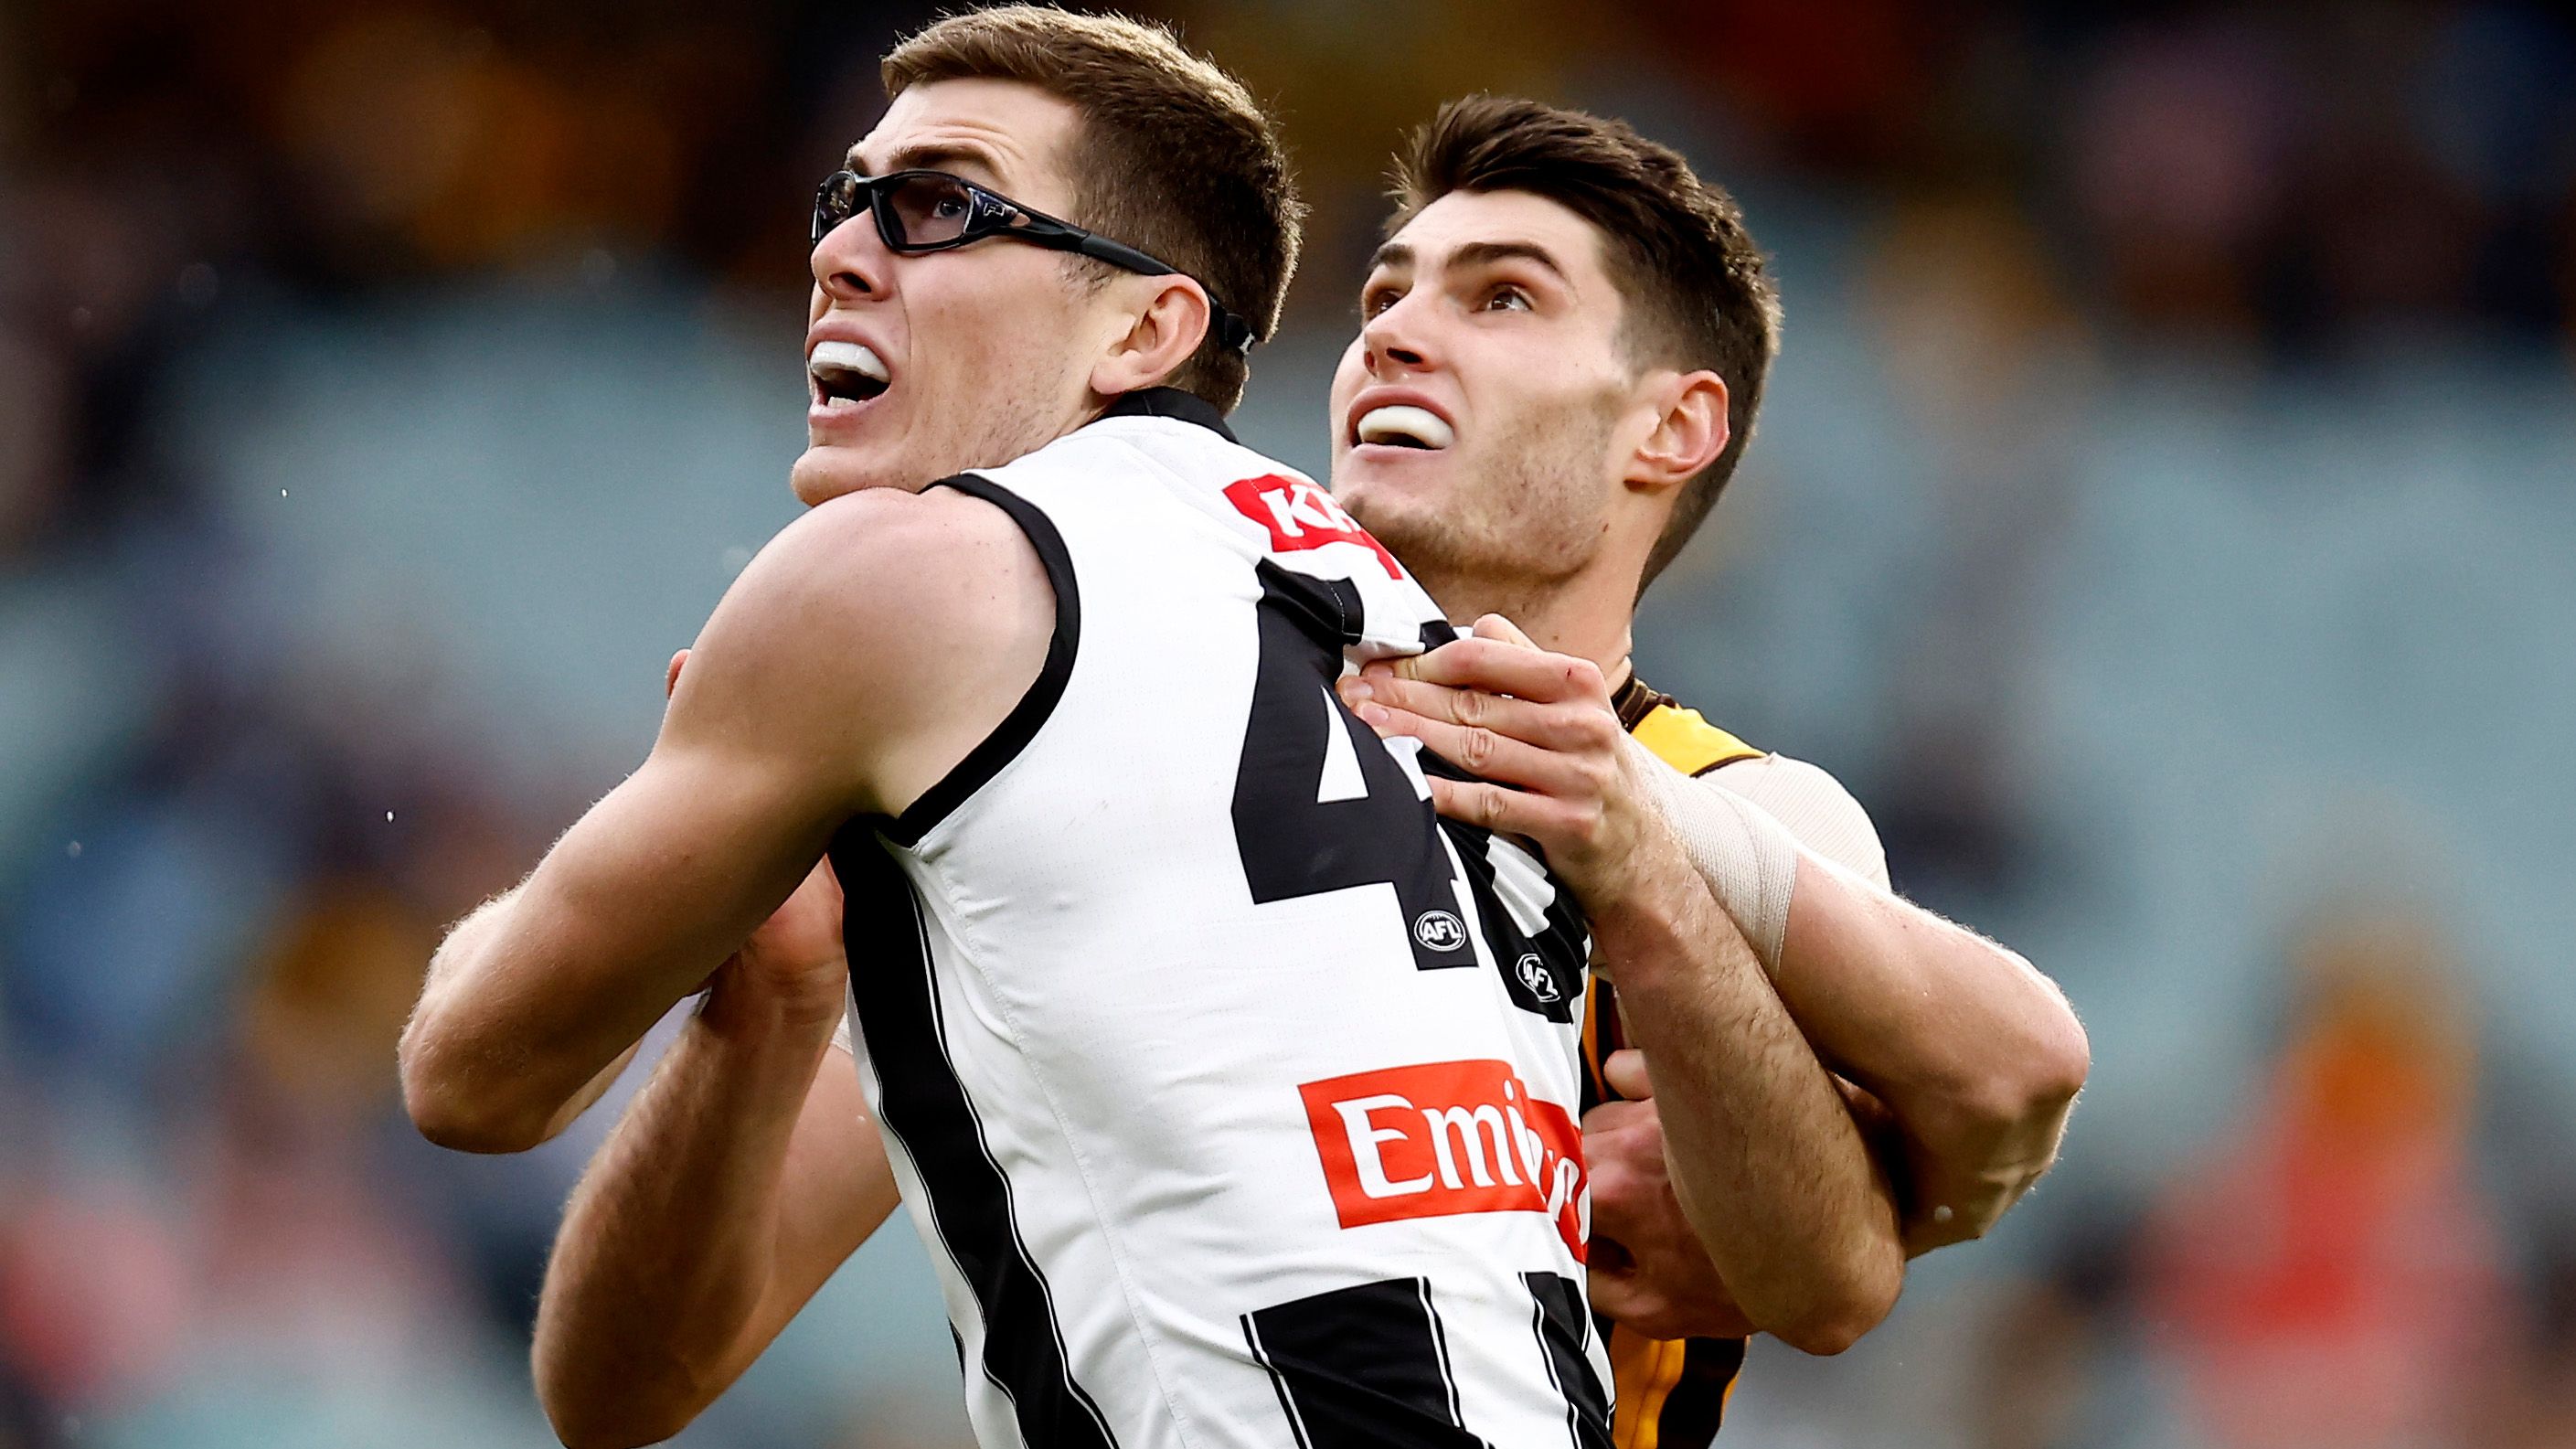 Mason Cox and Ned Reeves of the Hawks round 12 at the MCG last weekend. Photo: Darrian Traynor/Getty Images